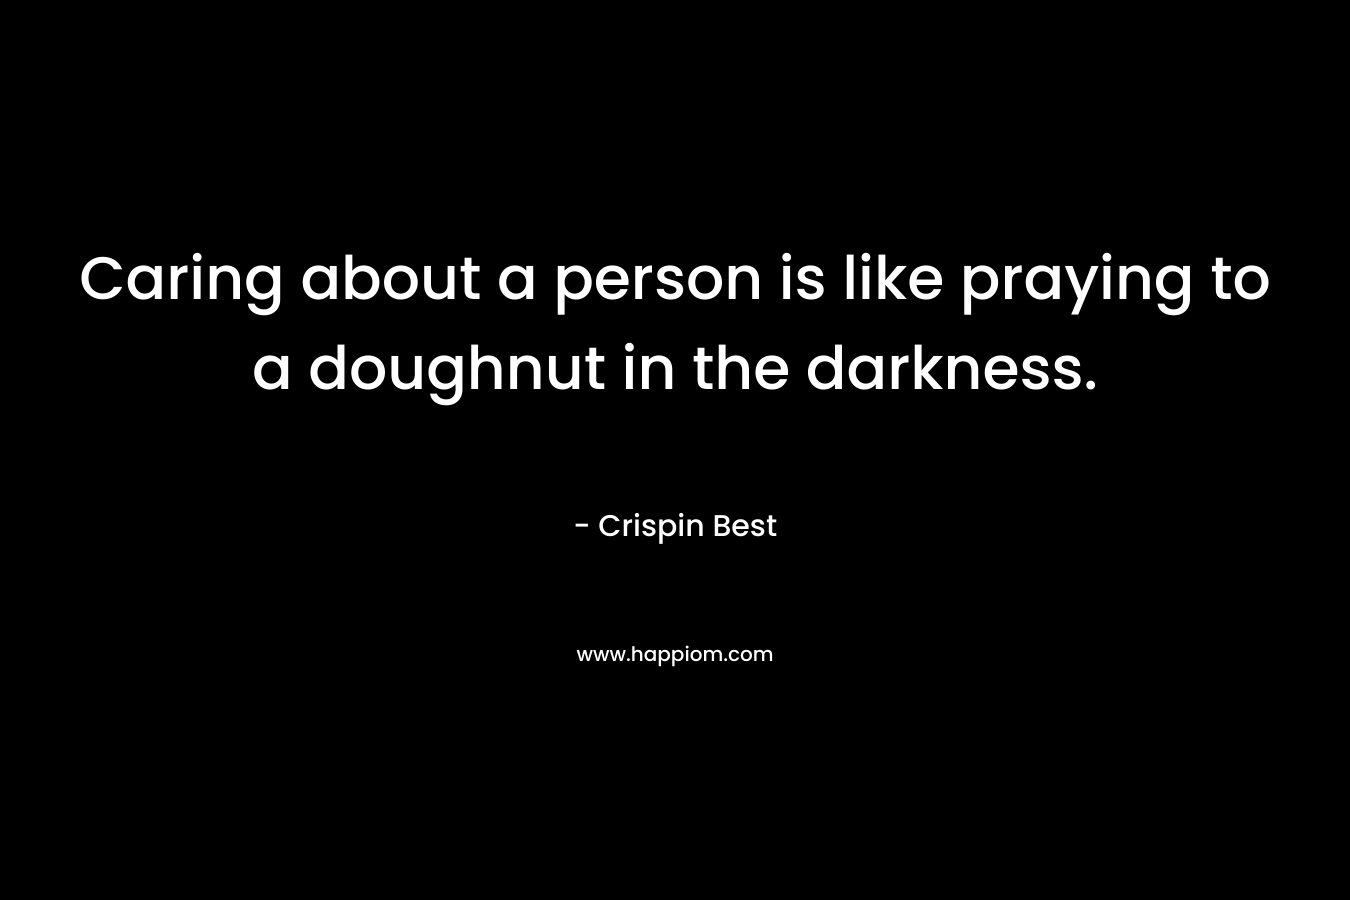 Caring about a person is like praying to a doughnut in the darkness.